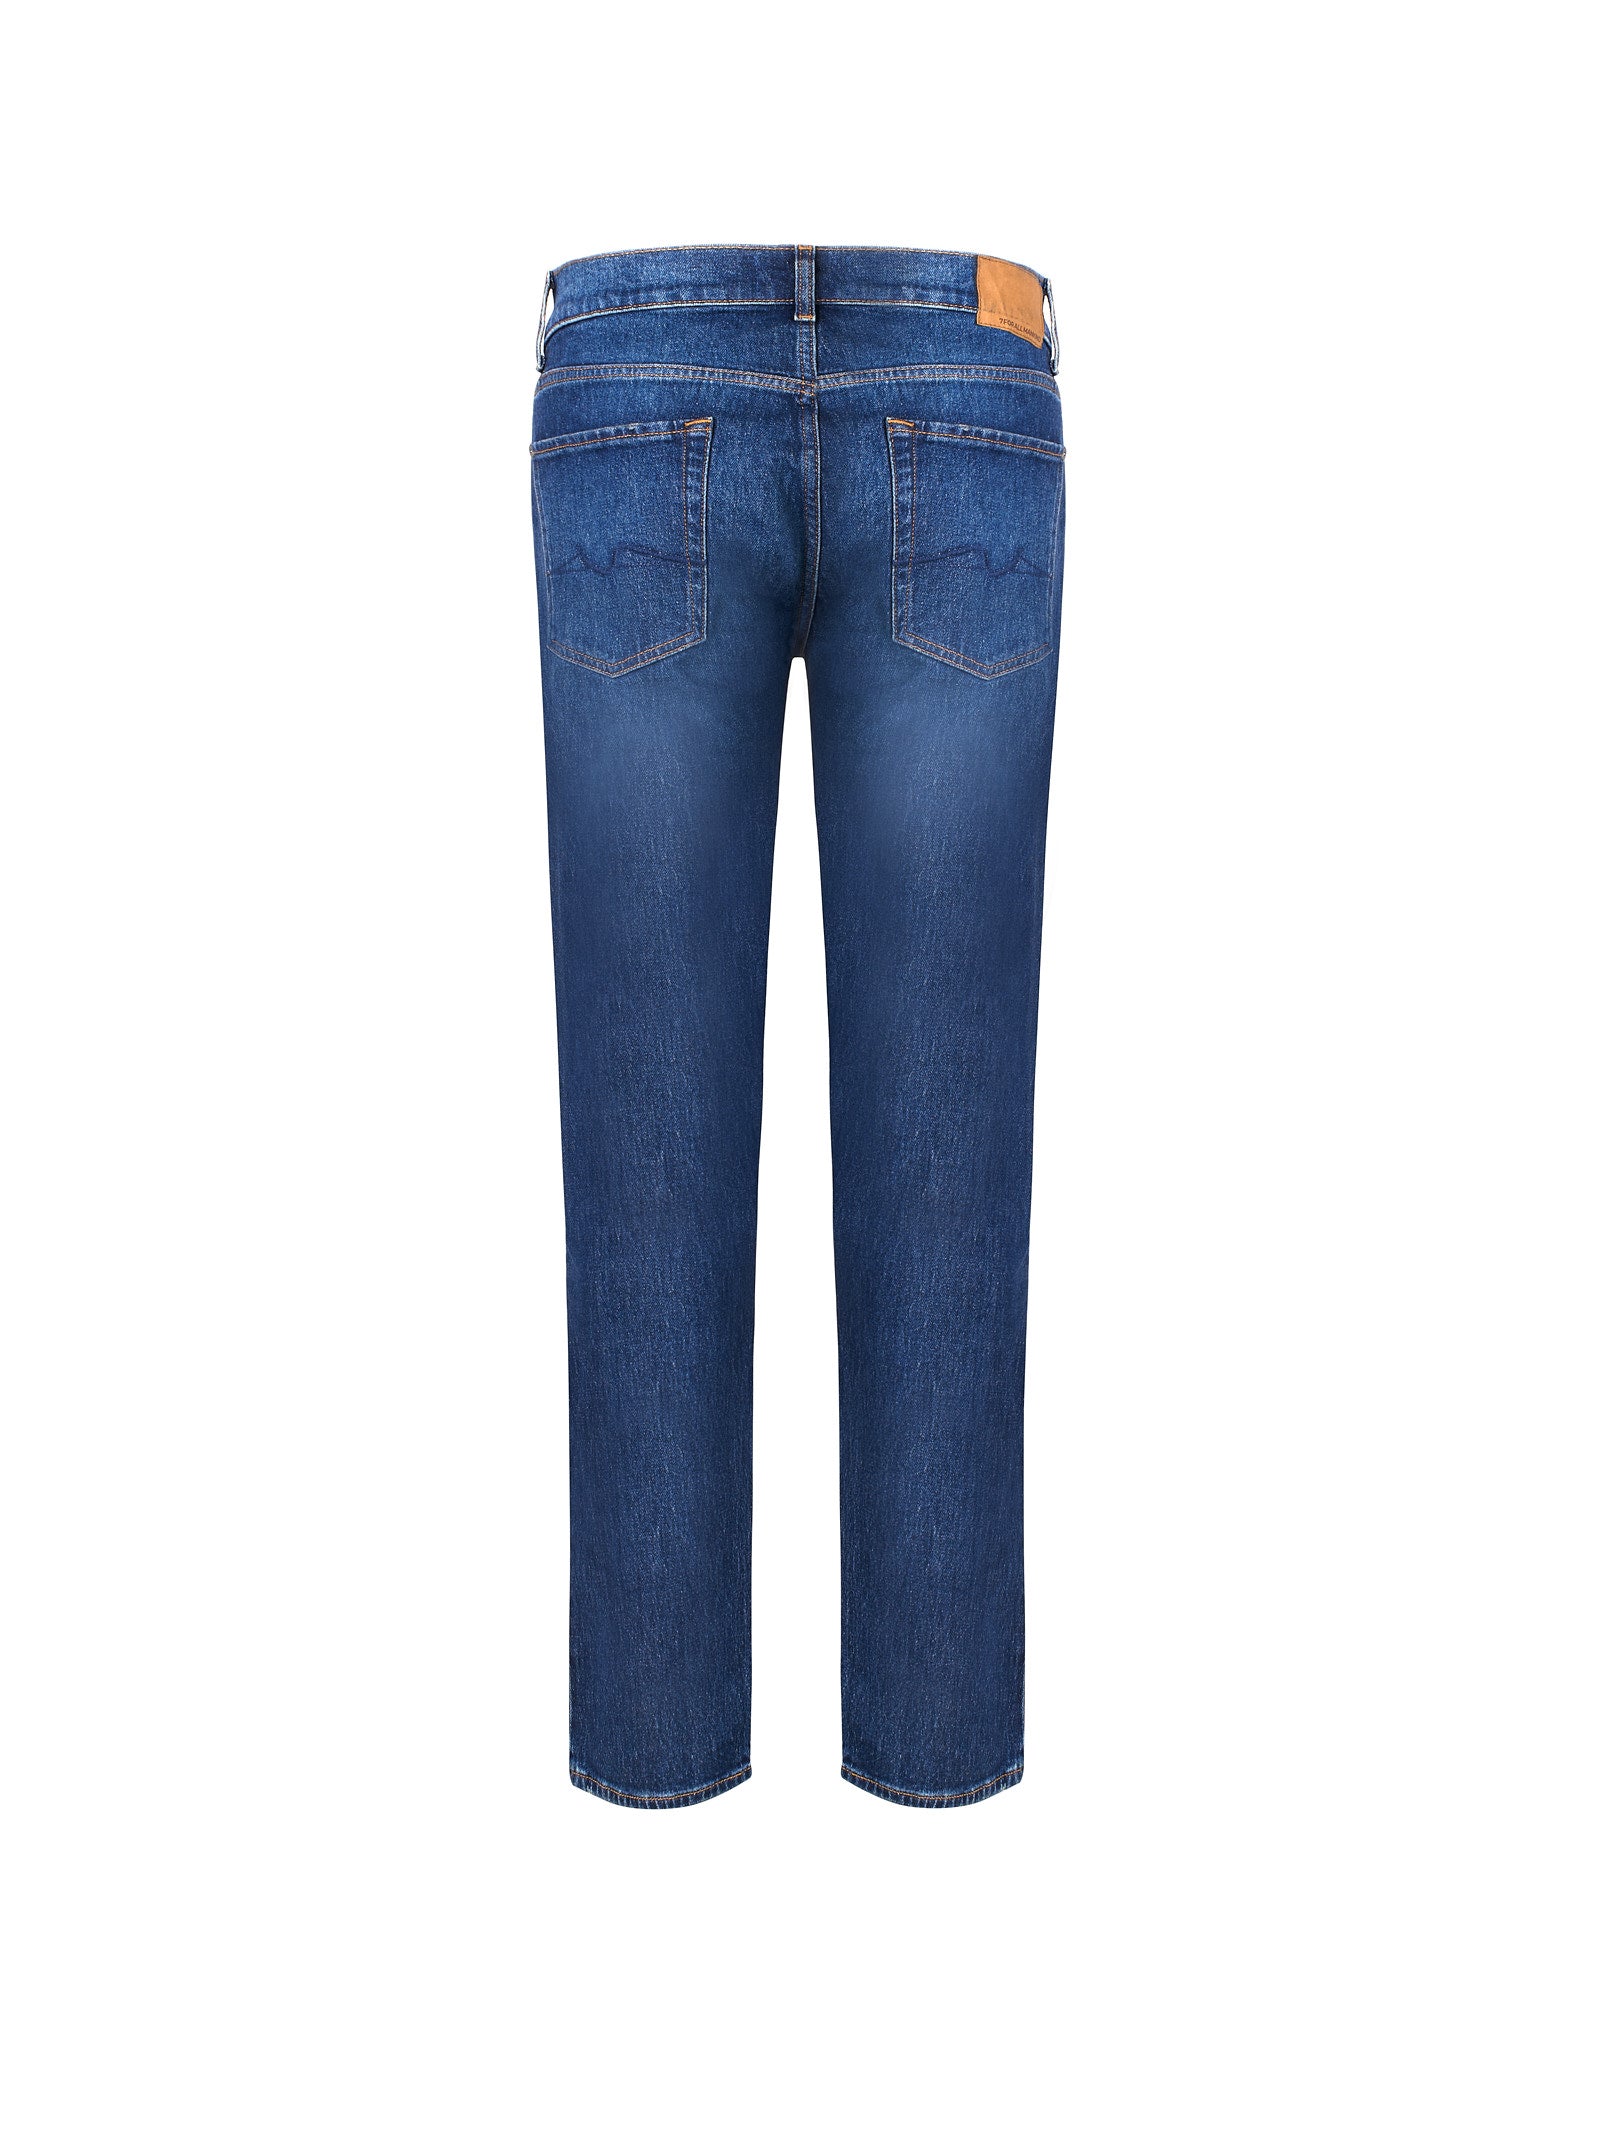 Jeans 7 FOR ALL MANKIND
Denim